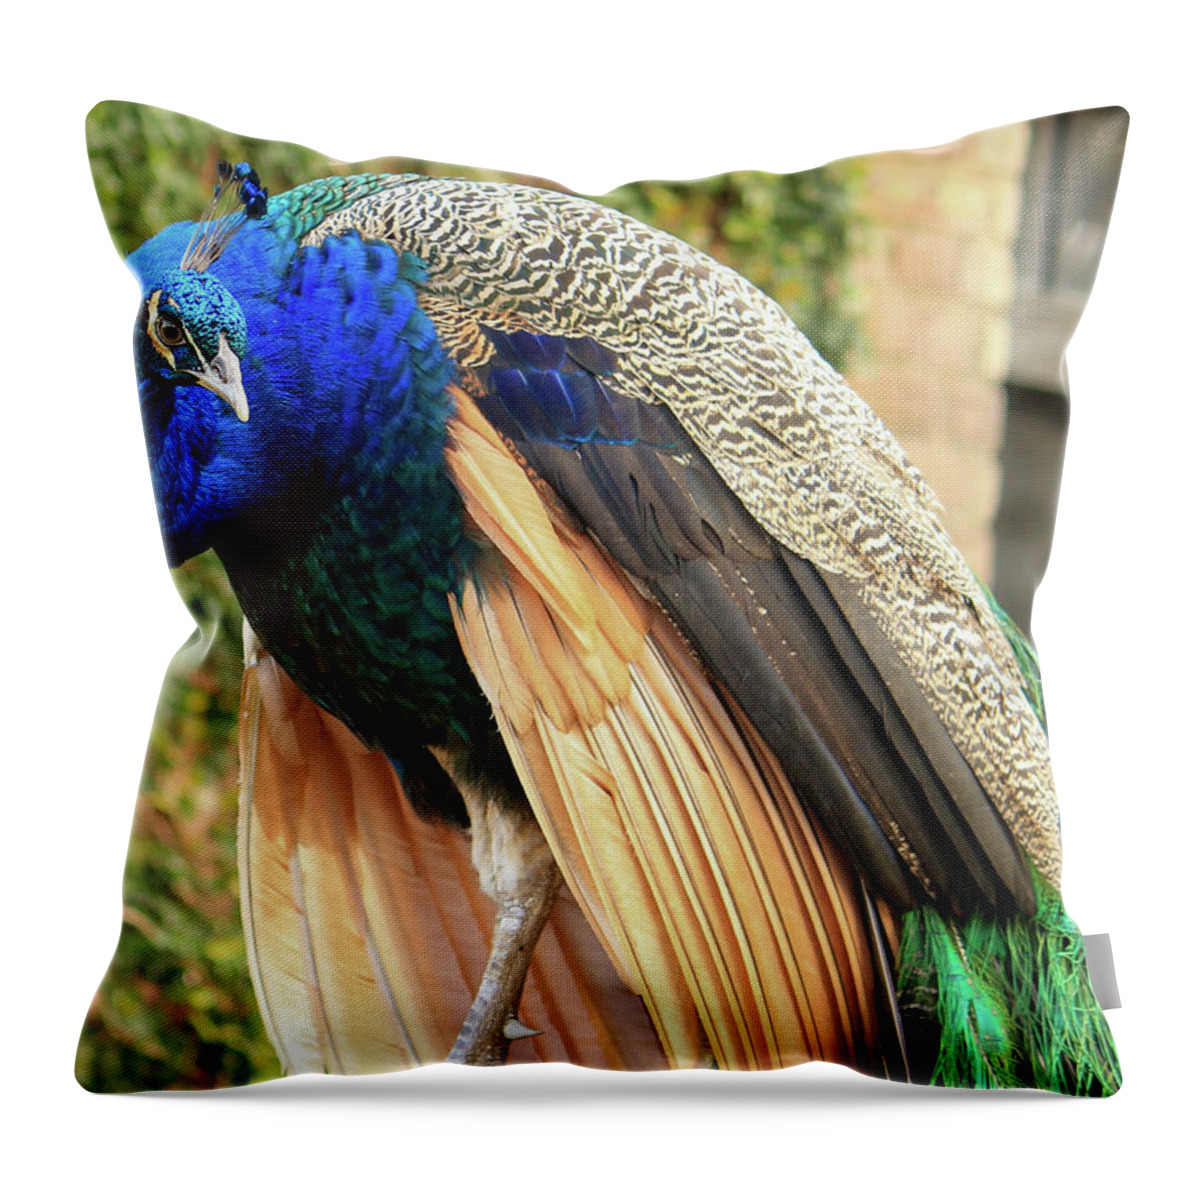 Peacock Throw Pillow featuring the photograph Peacock 3 by Cindy Robinson